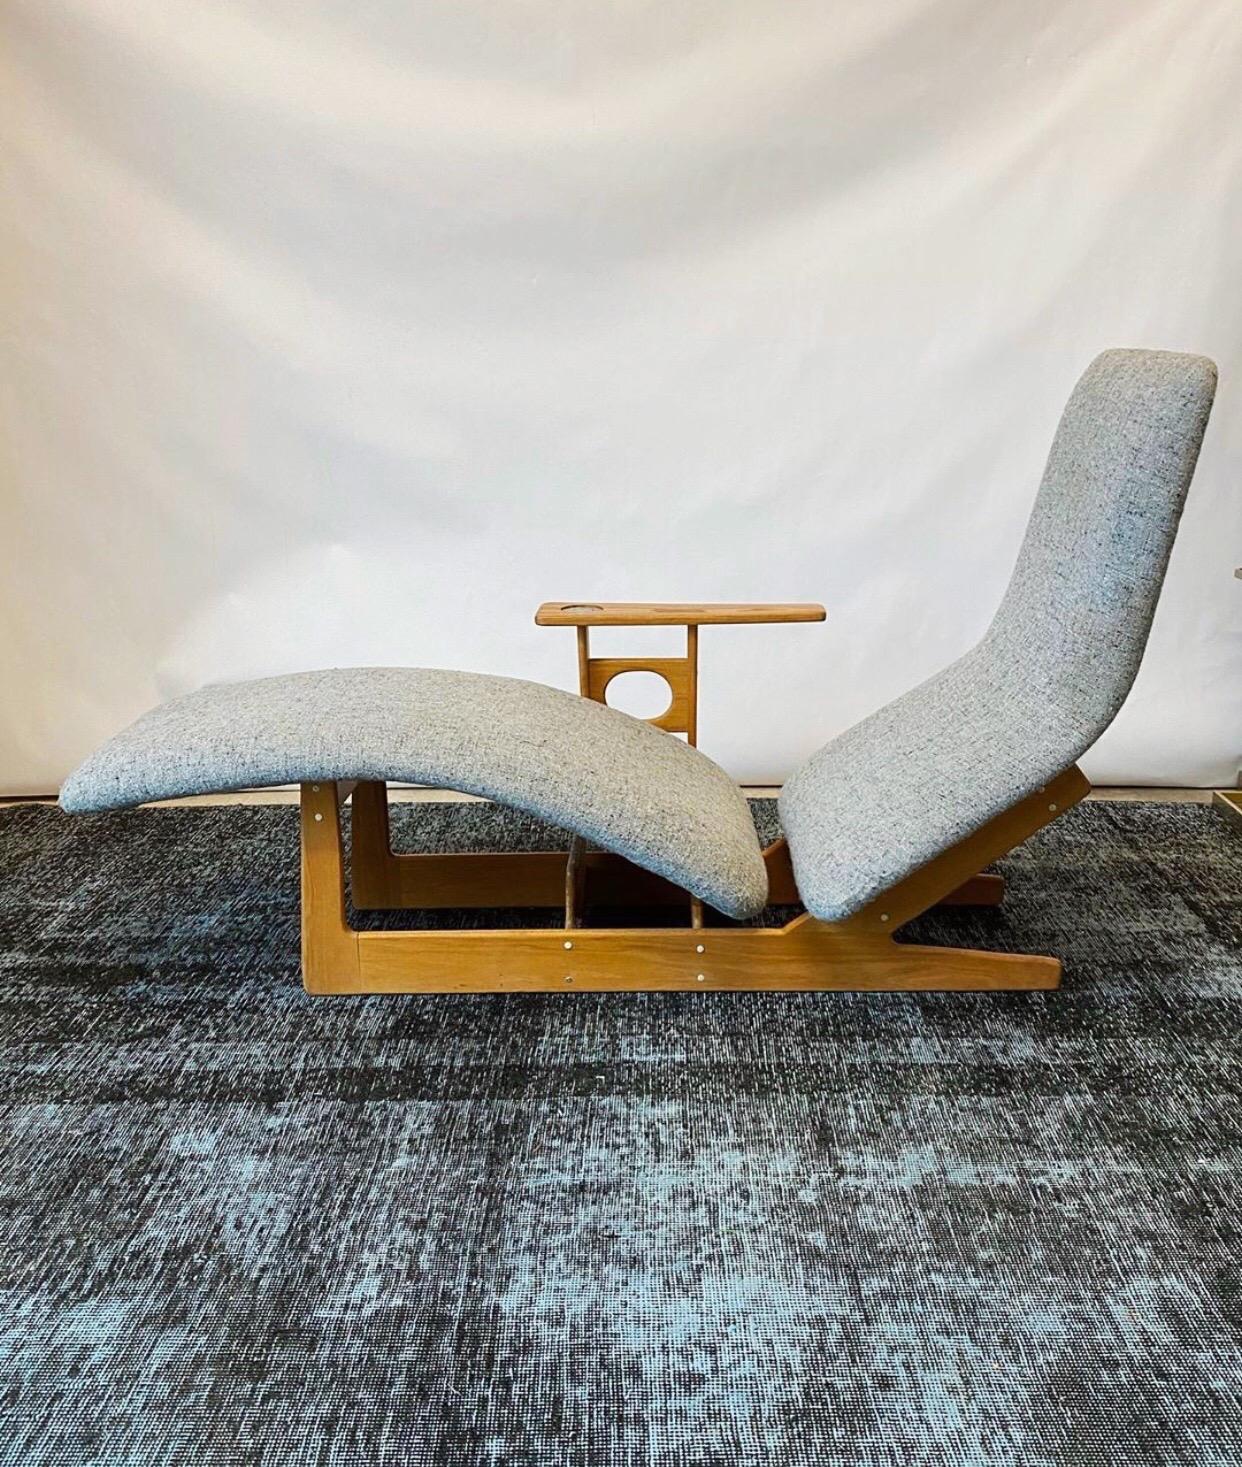 This mid century modern sculpted oak chaise lounge chair is in overall good condition and wear consistent with age and use.  This unique chaise lounge chair was created as a design student thesis project and the designer/maker is unknown.
Oak frame.